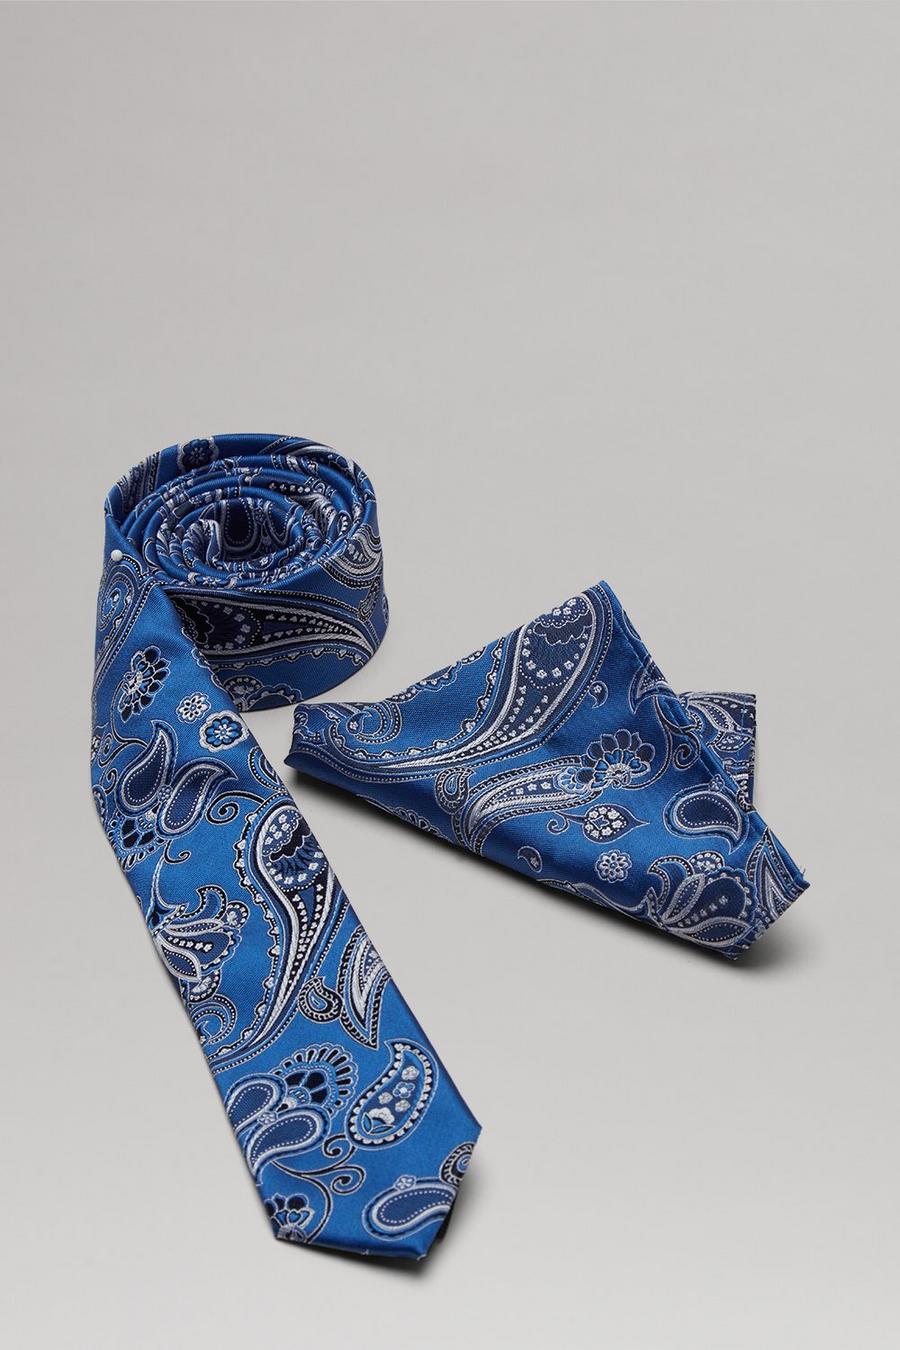 Blue And Grey Paisley Tie And Pocket Square Set